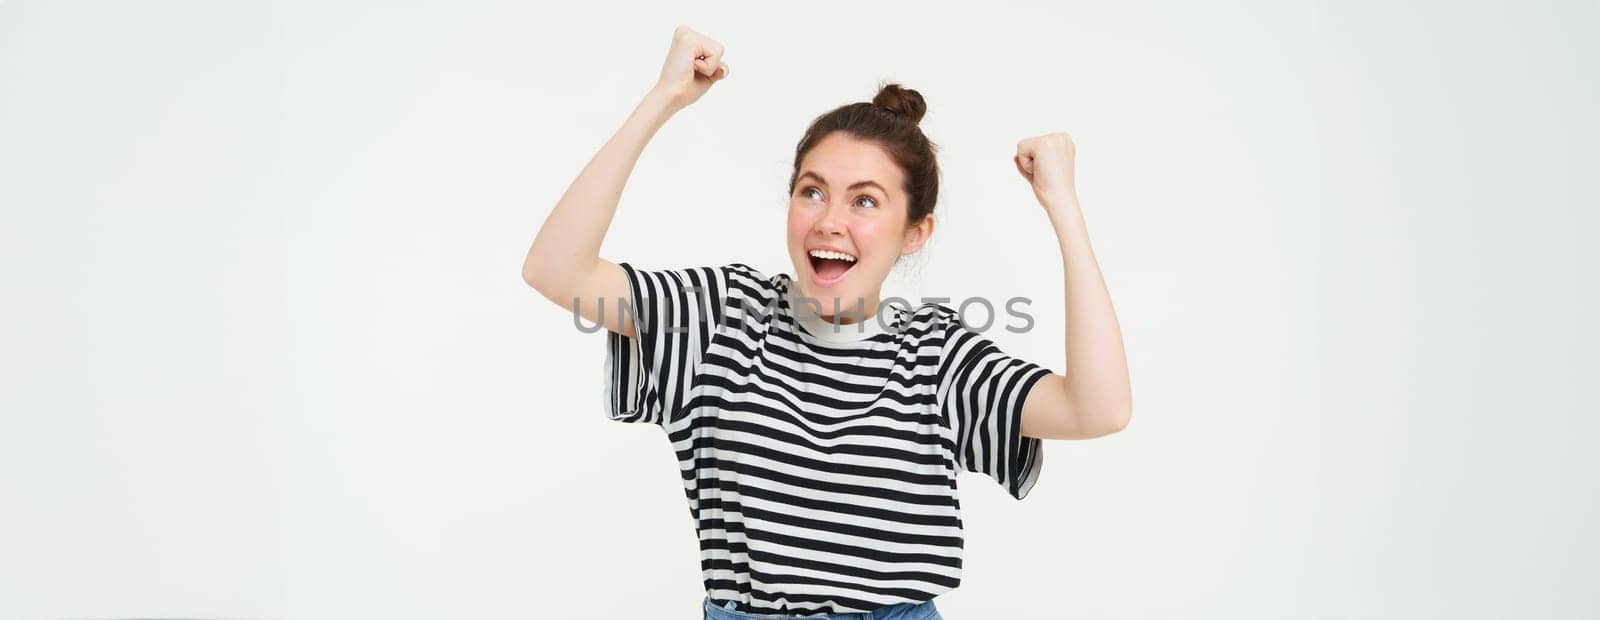 Image of excited young girl cheering, raising hands up, screams from excitement and happiness, winning, celebrating victory, standing over white background.